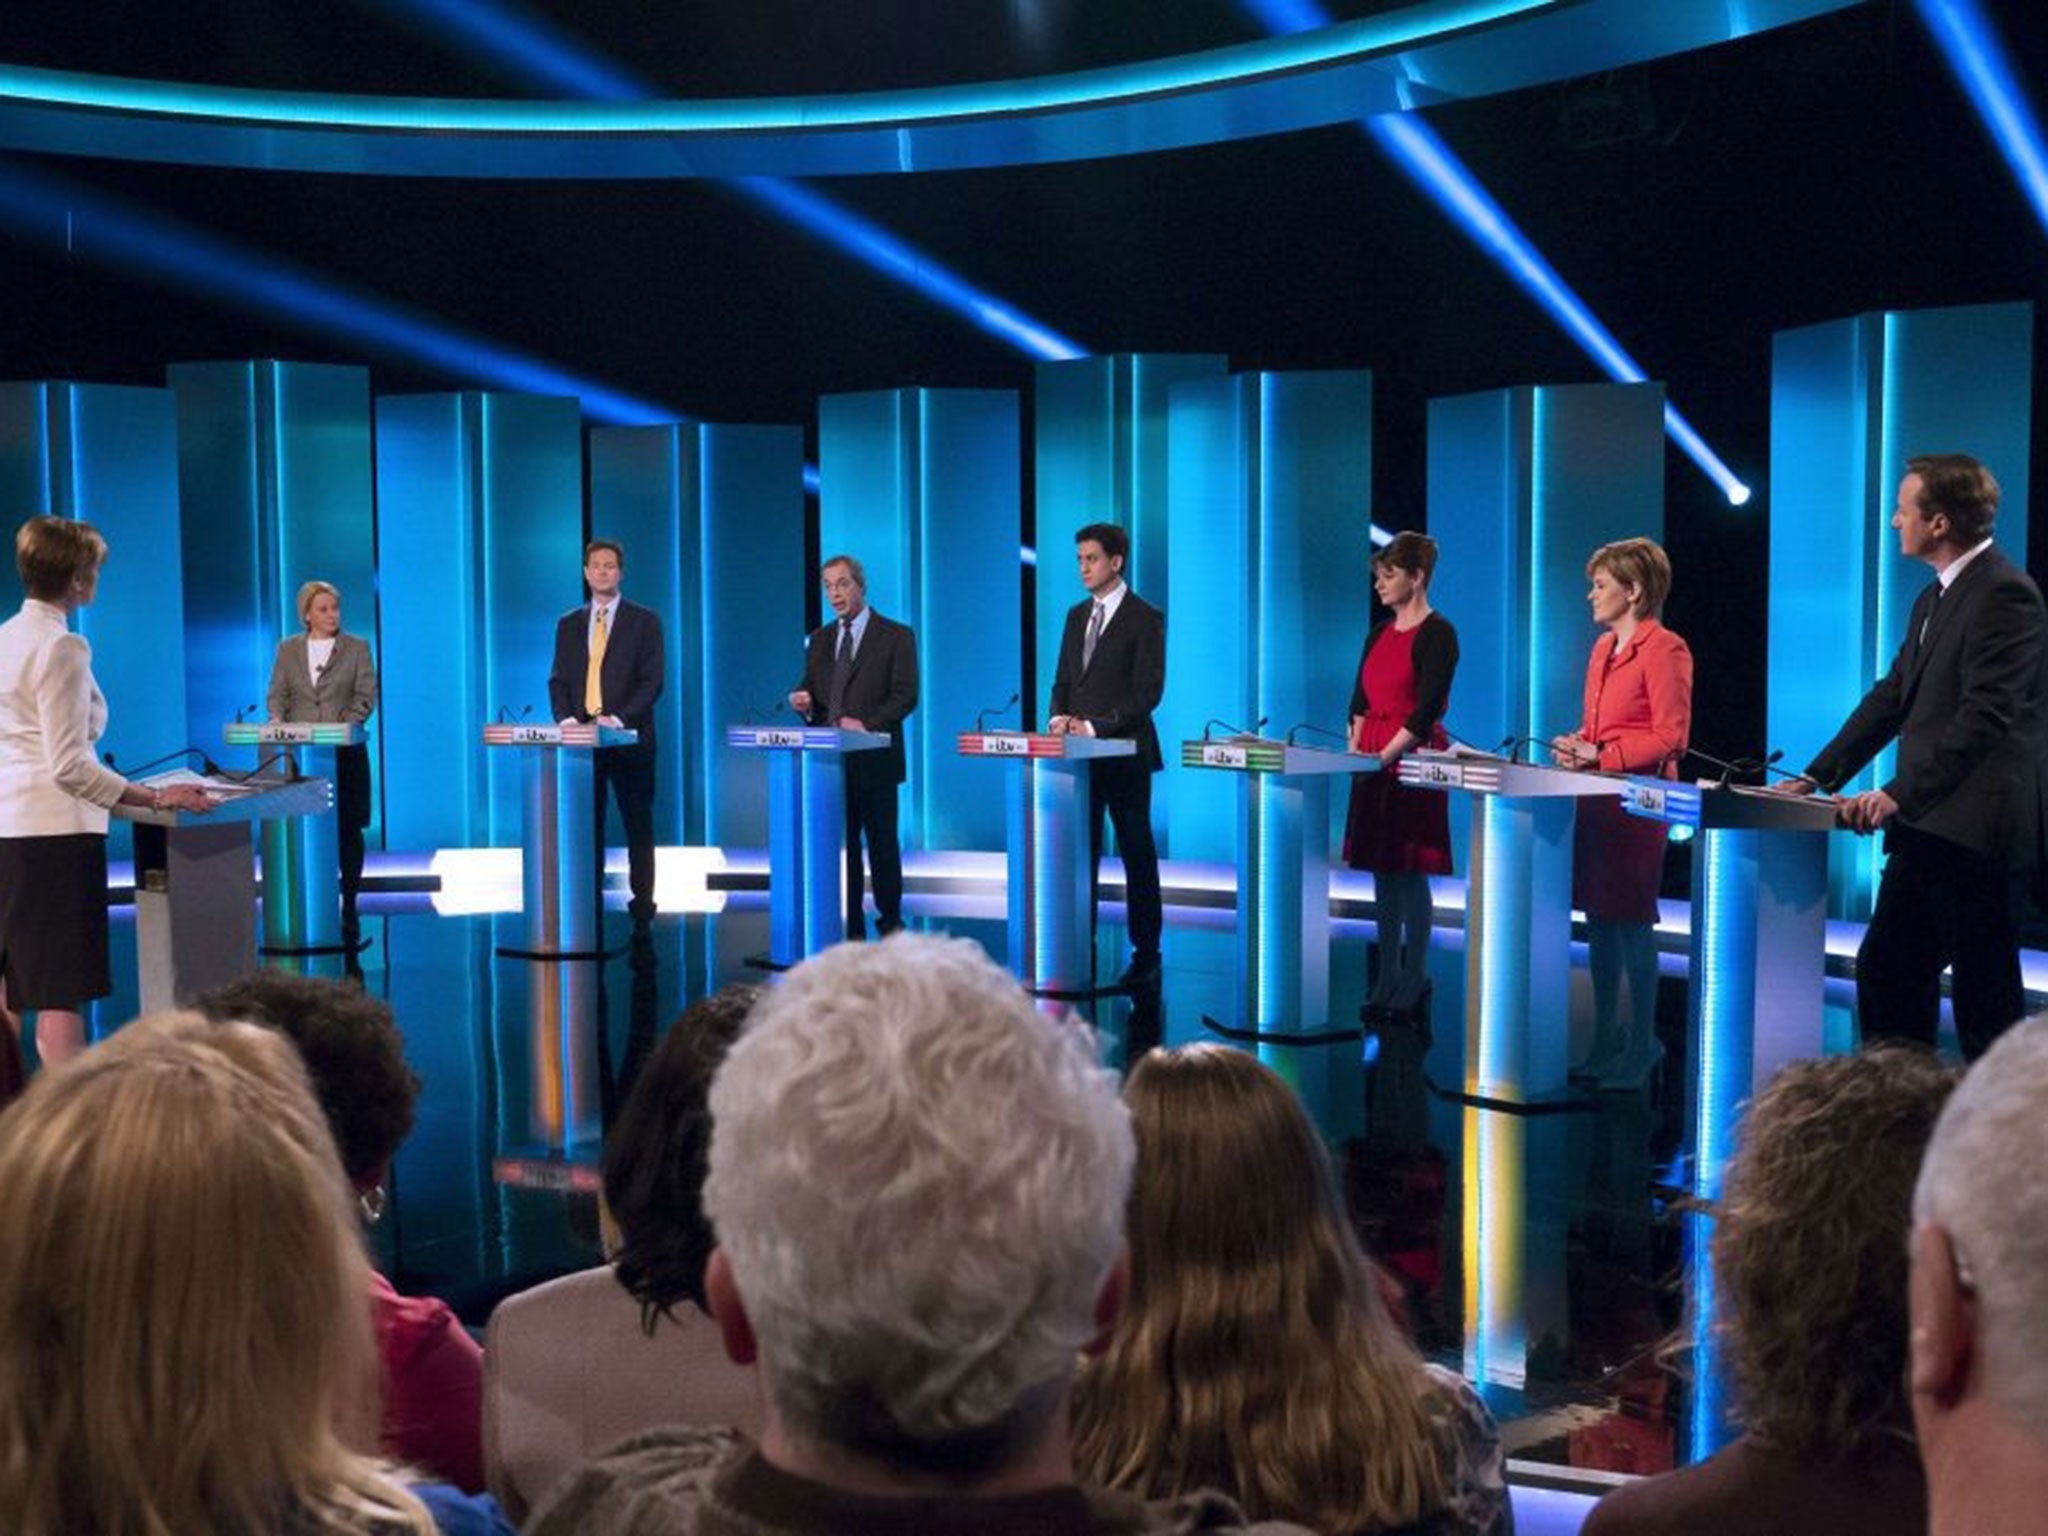 The seven leaders of Britain's main political parties take part in the general election live debate.